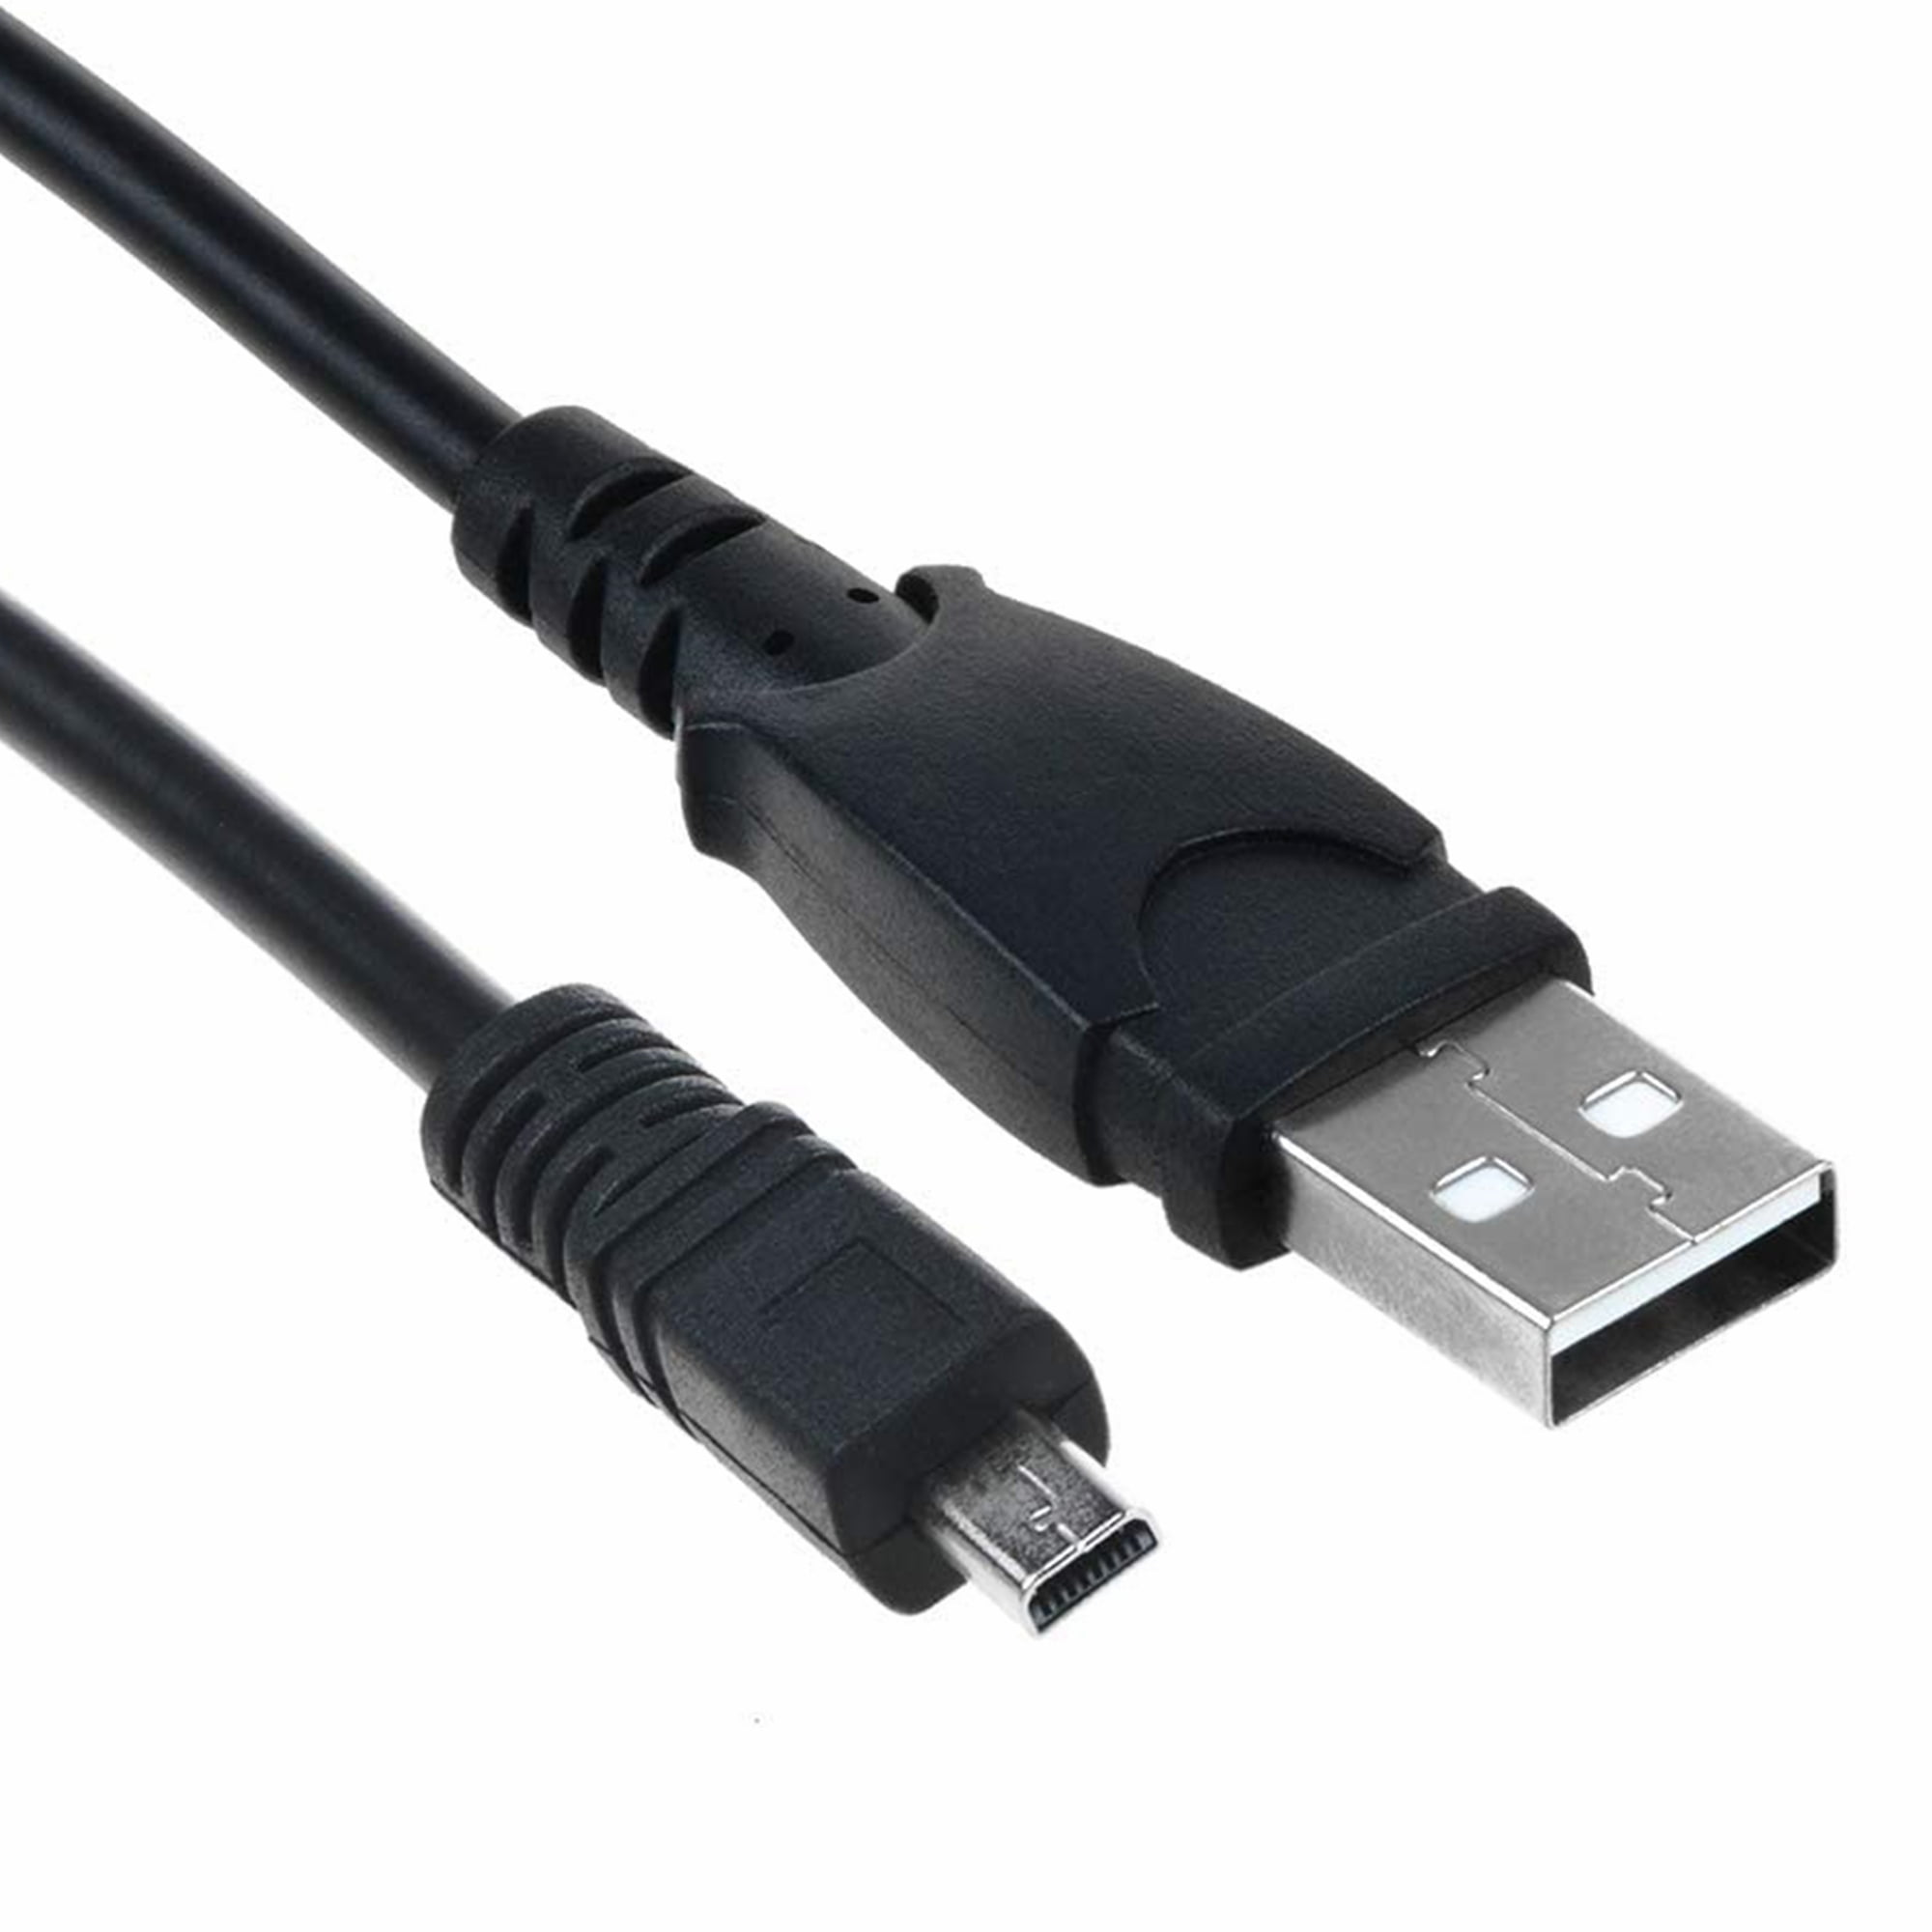 USB 3.0 Charger+Data SYNC Cable Cord Lead For WD My Book Essential WDBACW0010HBK 